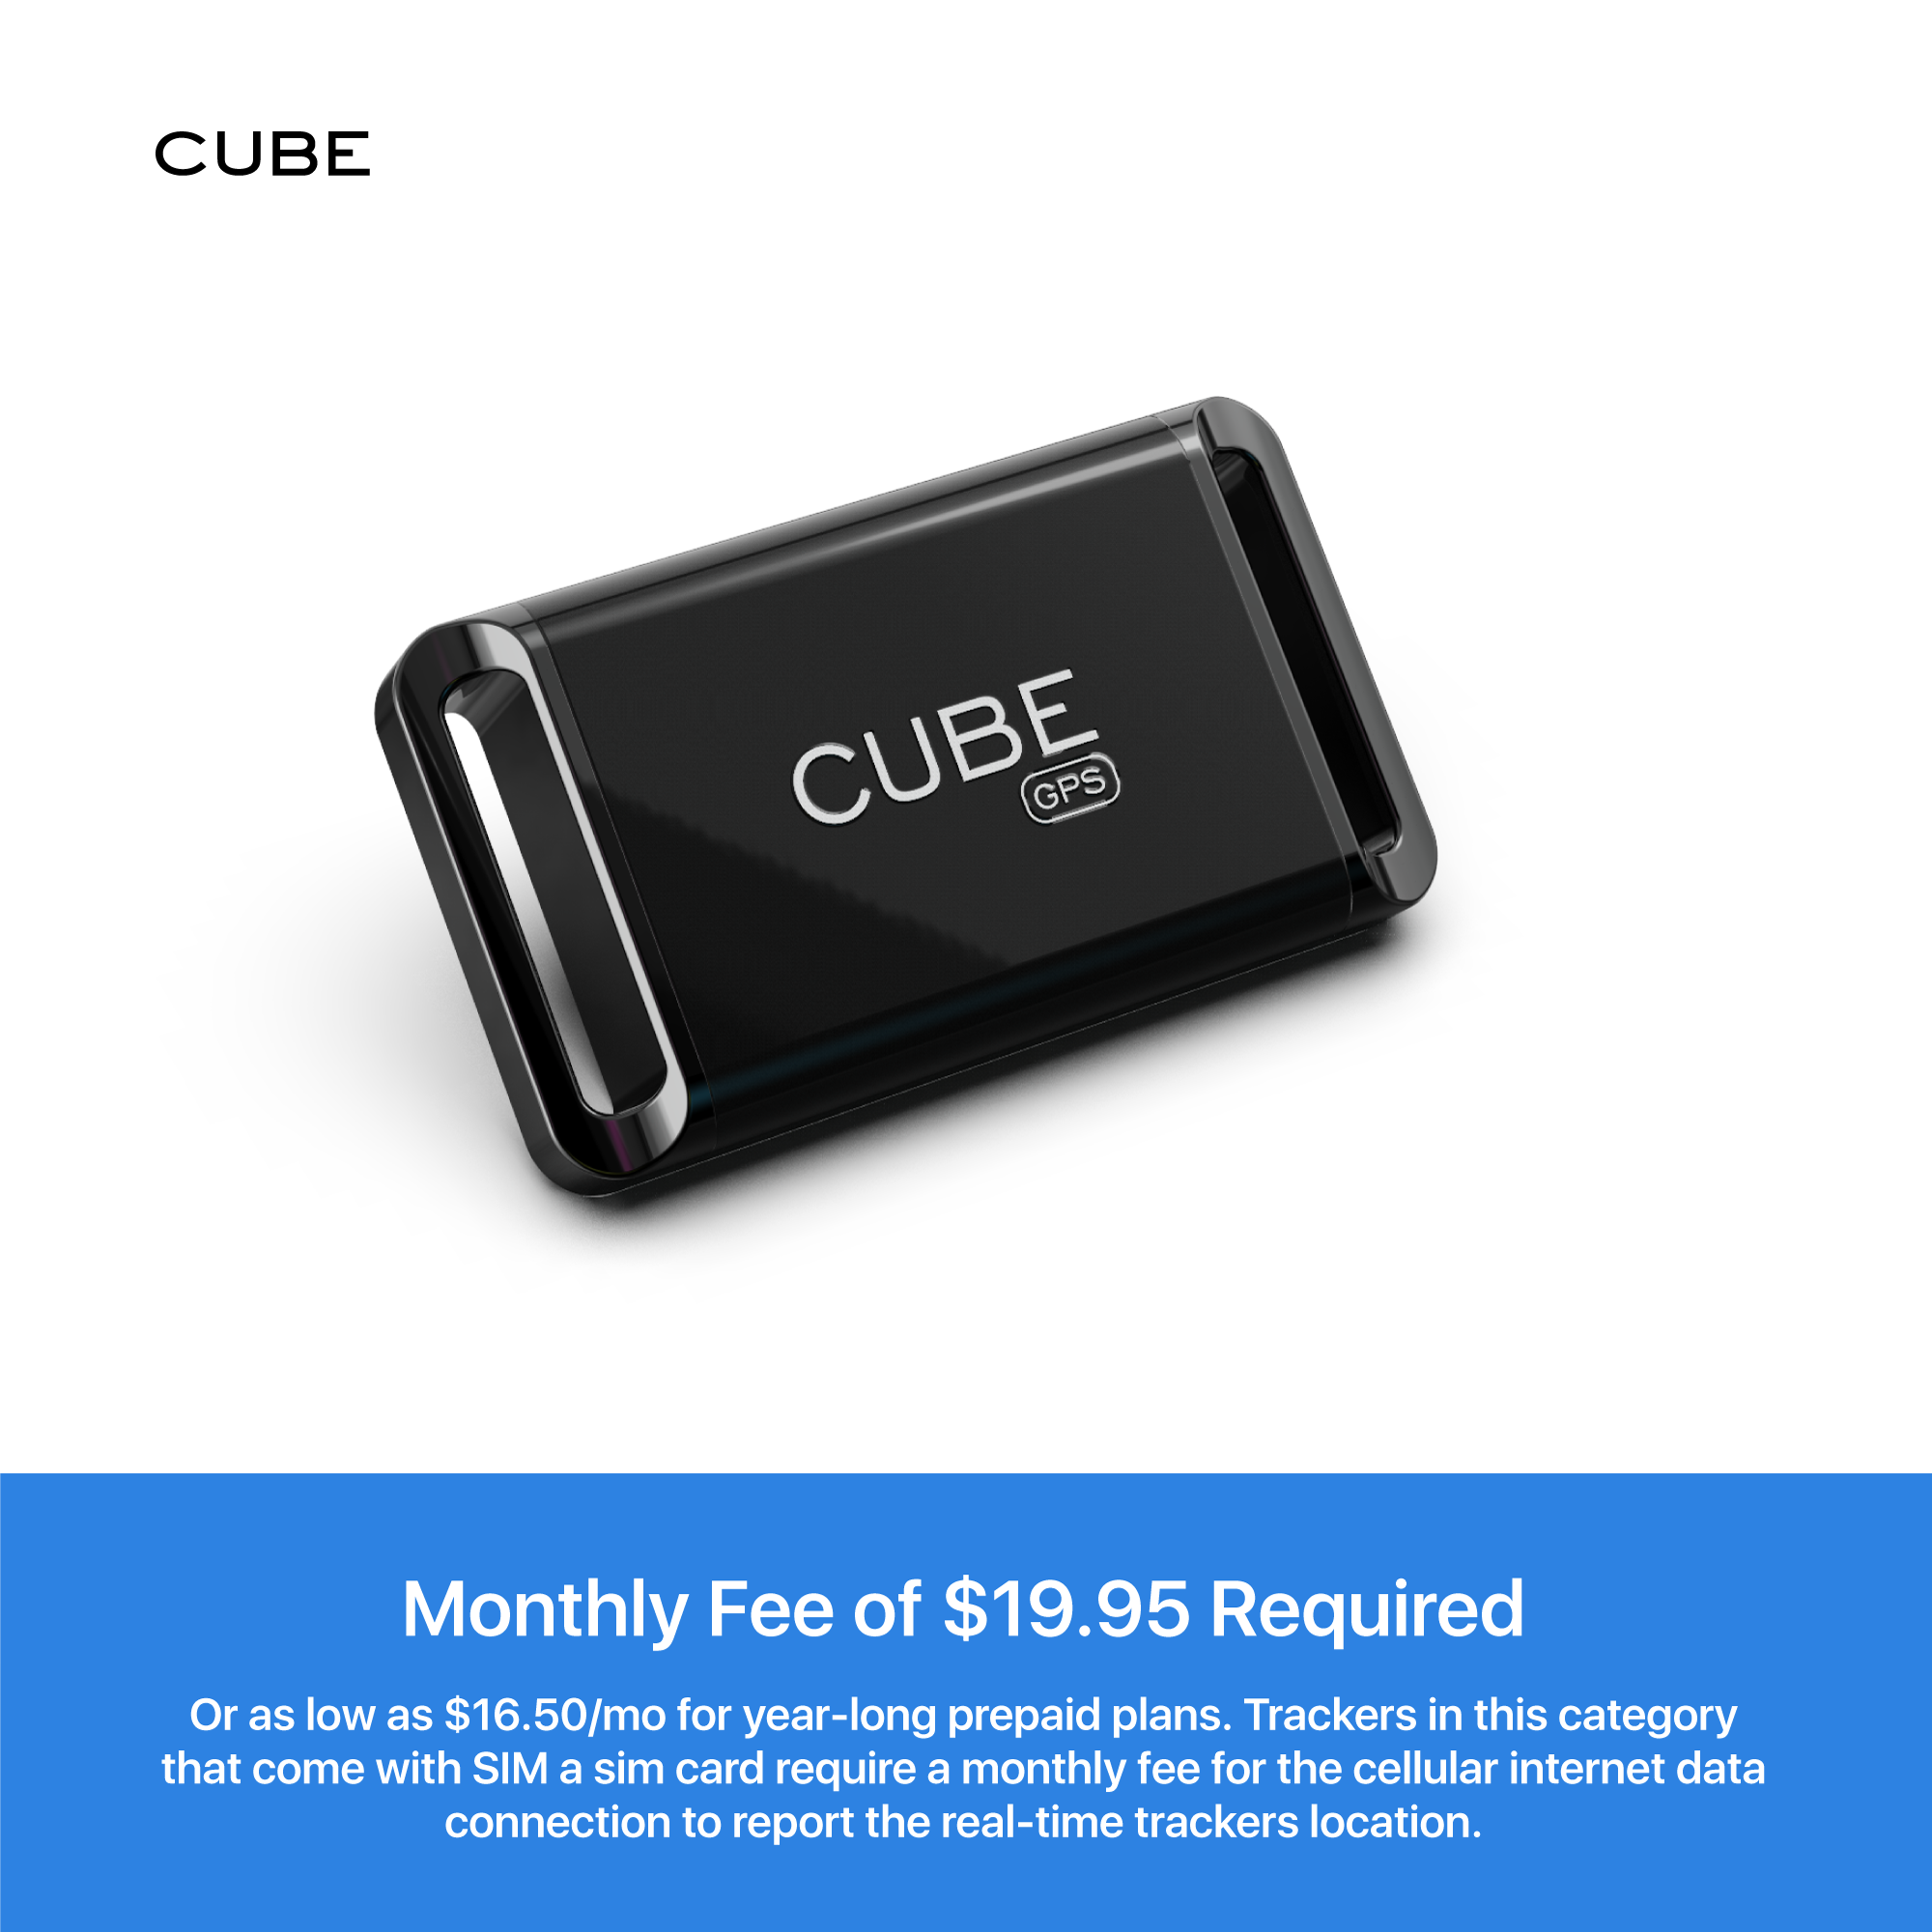 Cube GPS Tracker, Track Your Car, Dog, or Kids, In Real Time